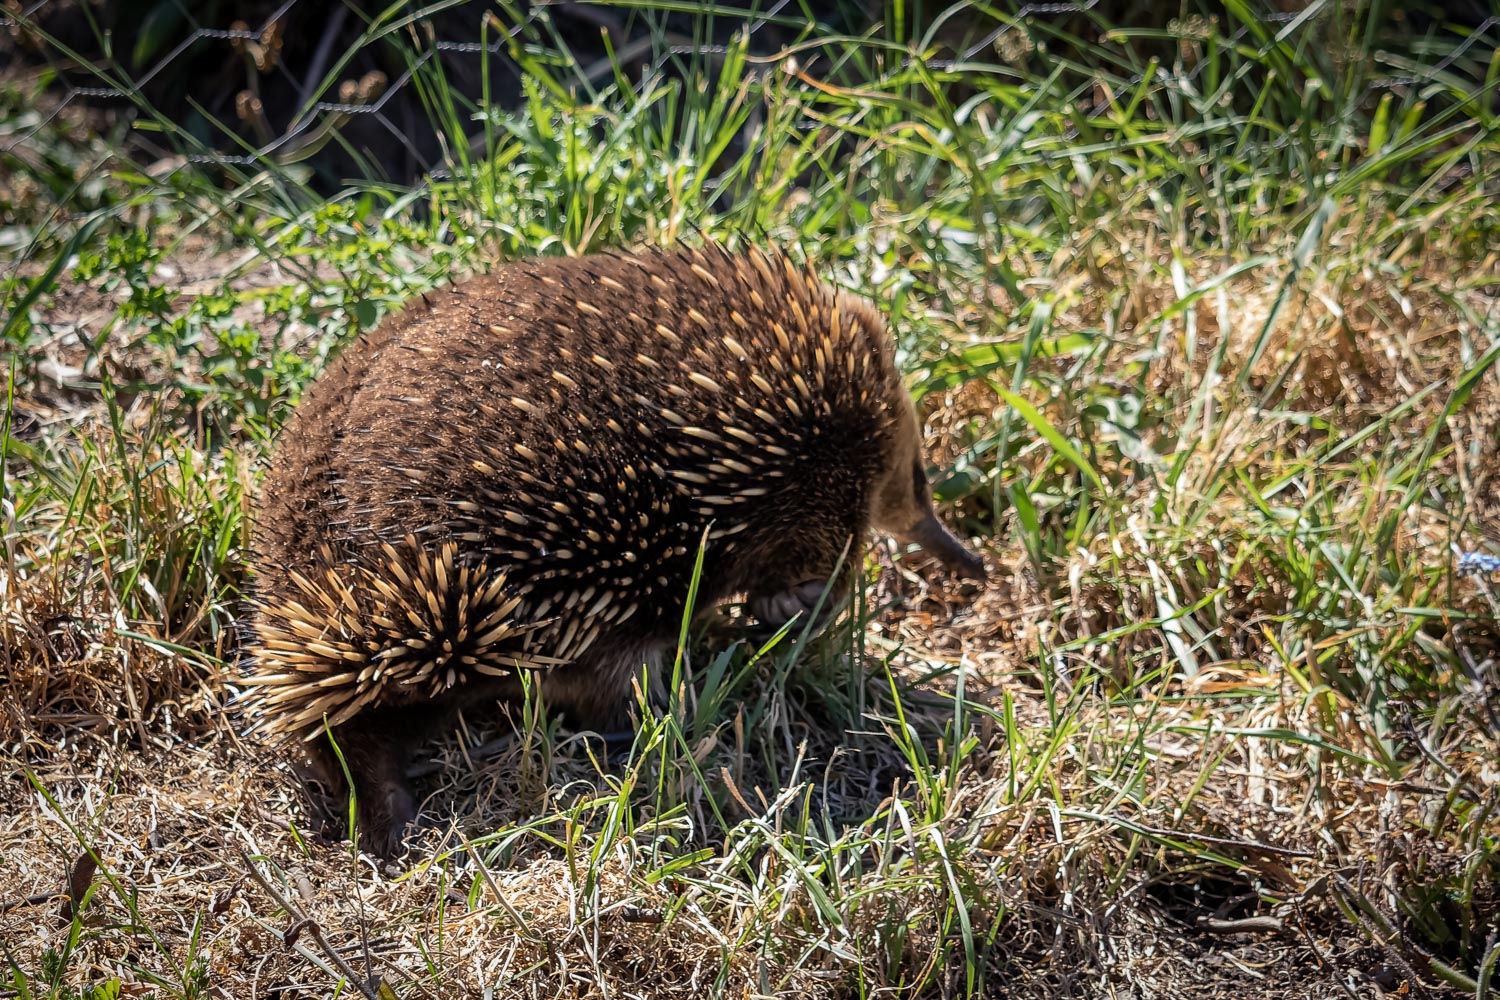 back view of an echidna in a garden. It is a small brown mammal with spikes all over its body and a long nose